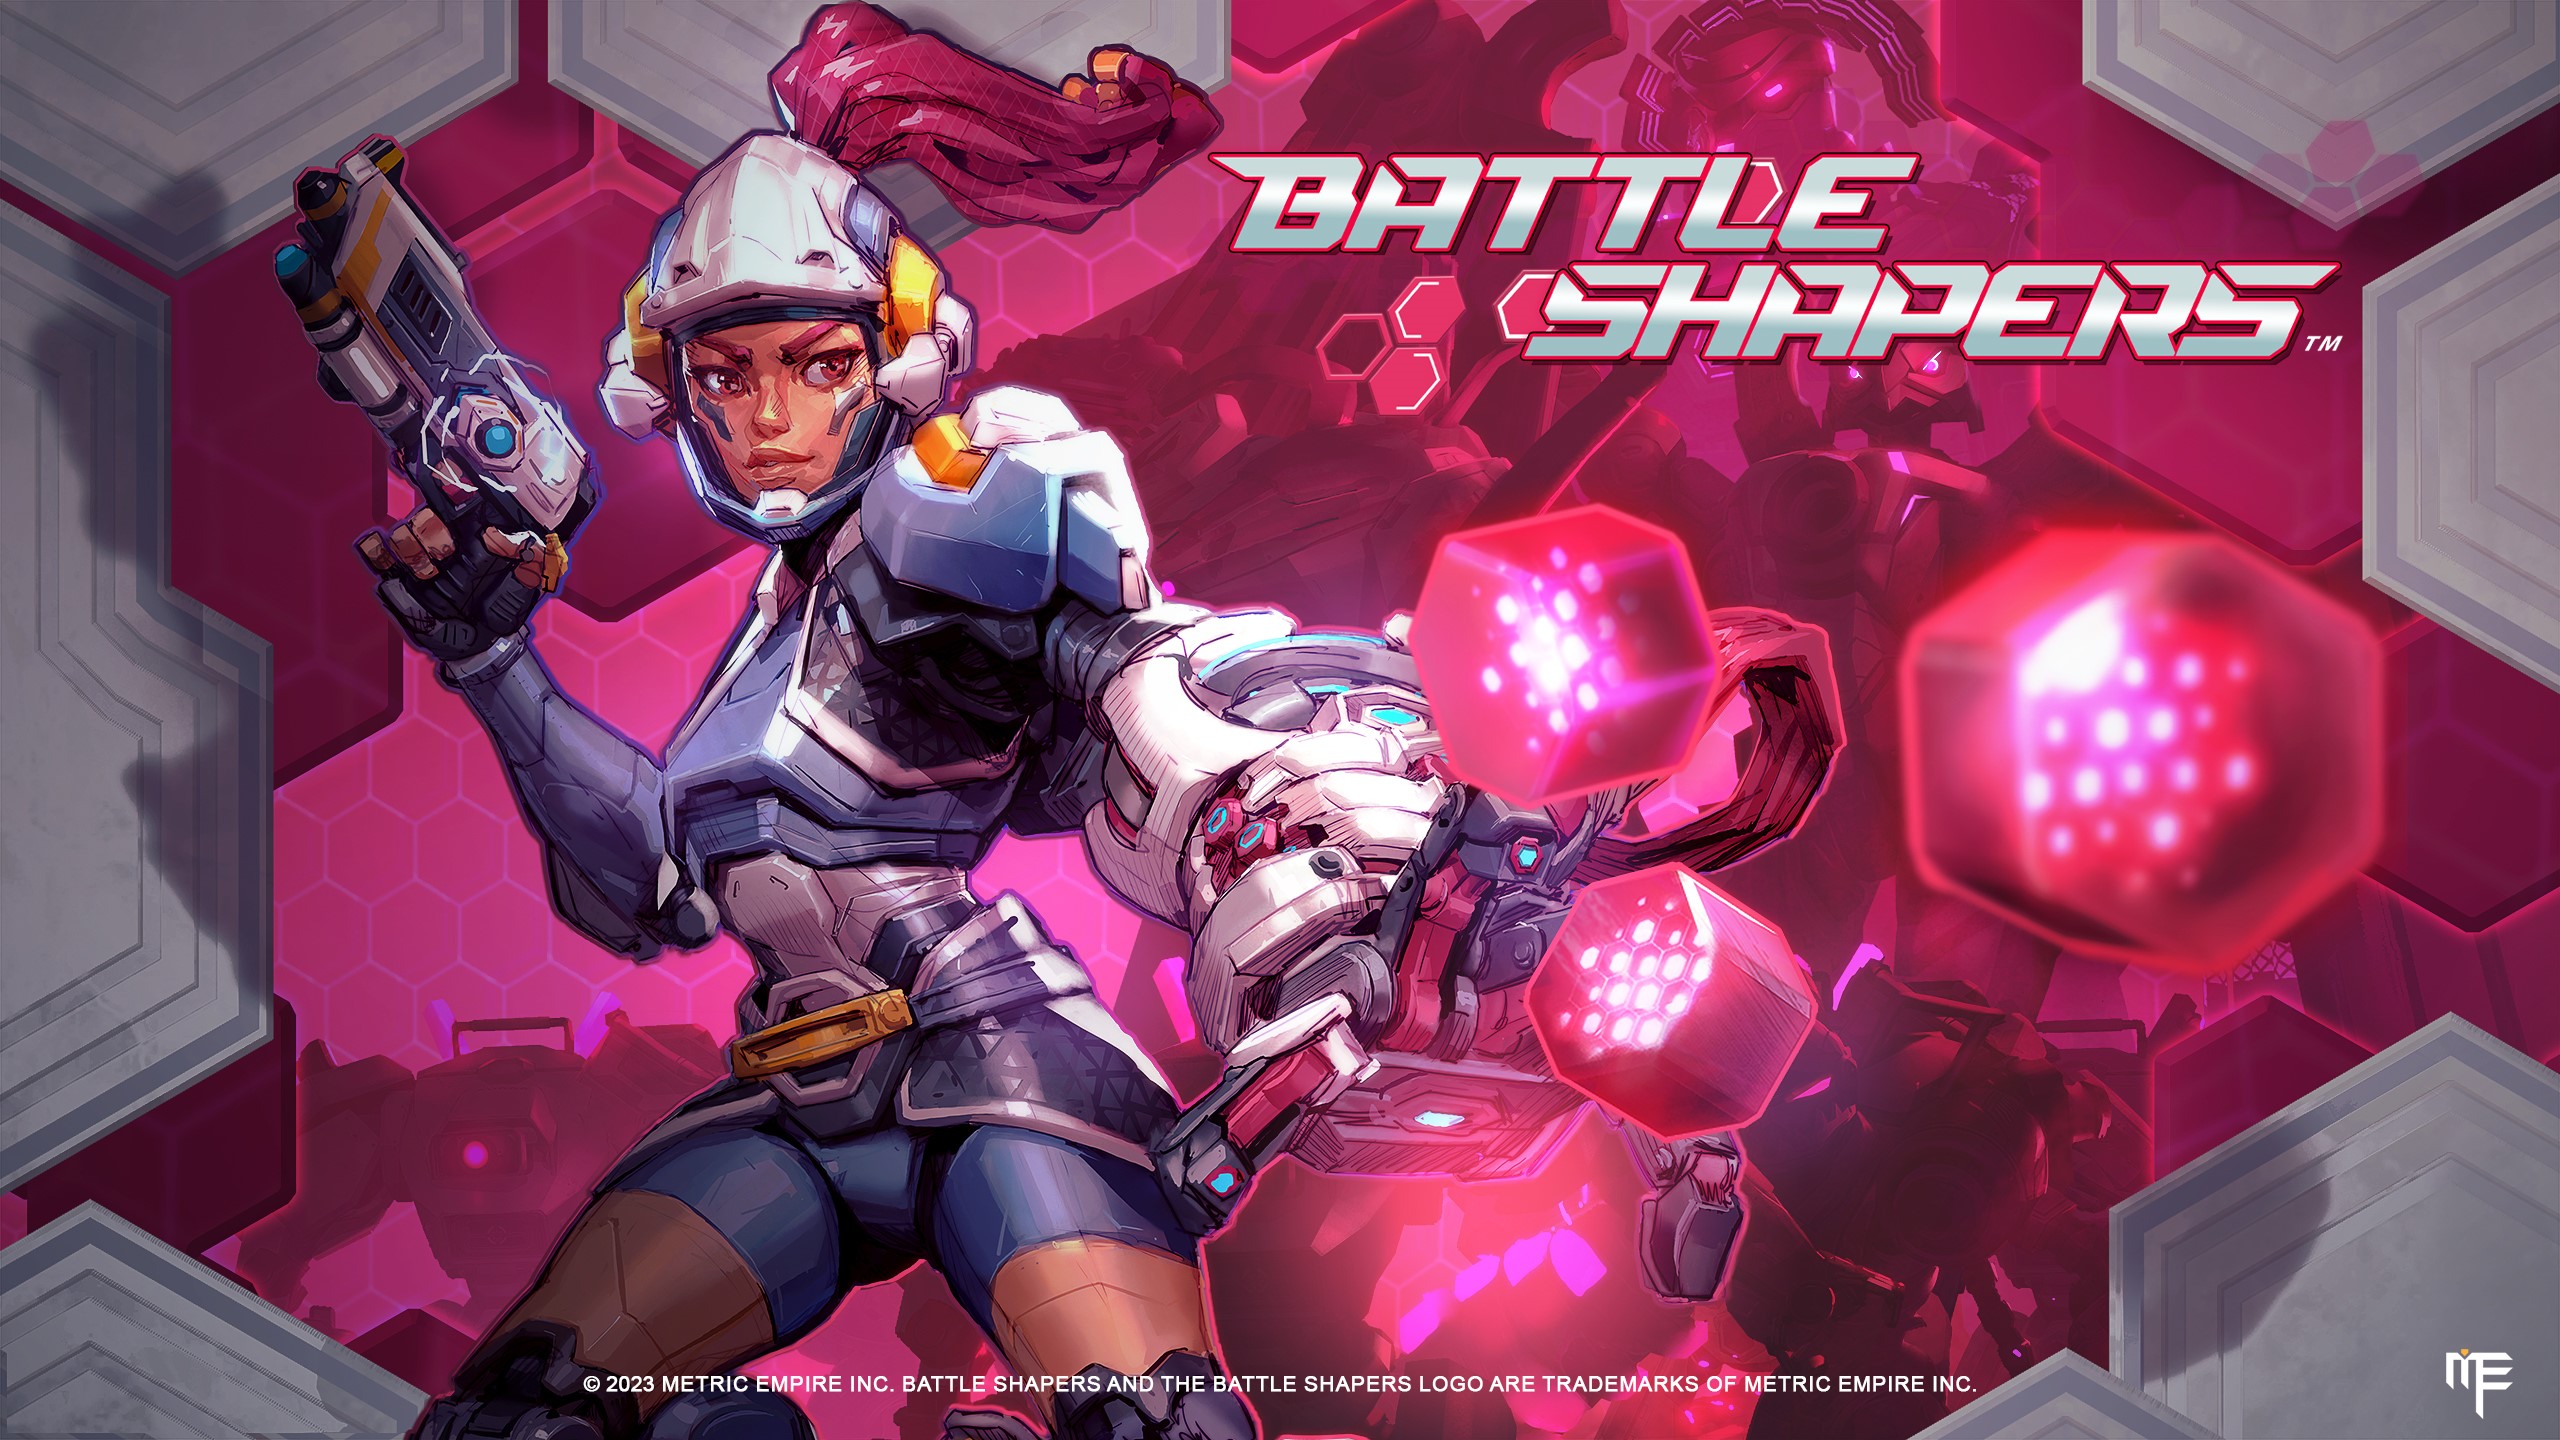 Blazing fast roguelite FPS Battle Shapers announced